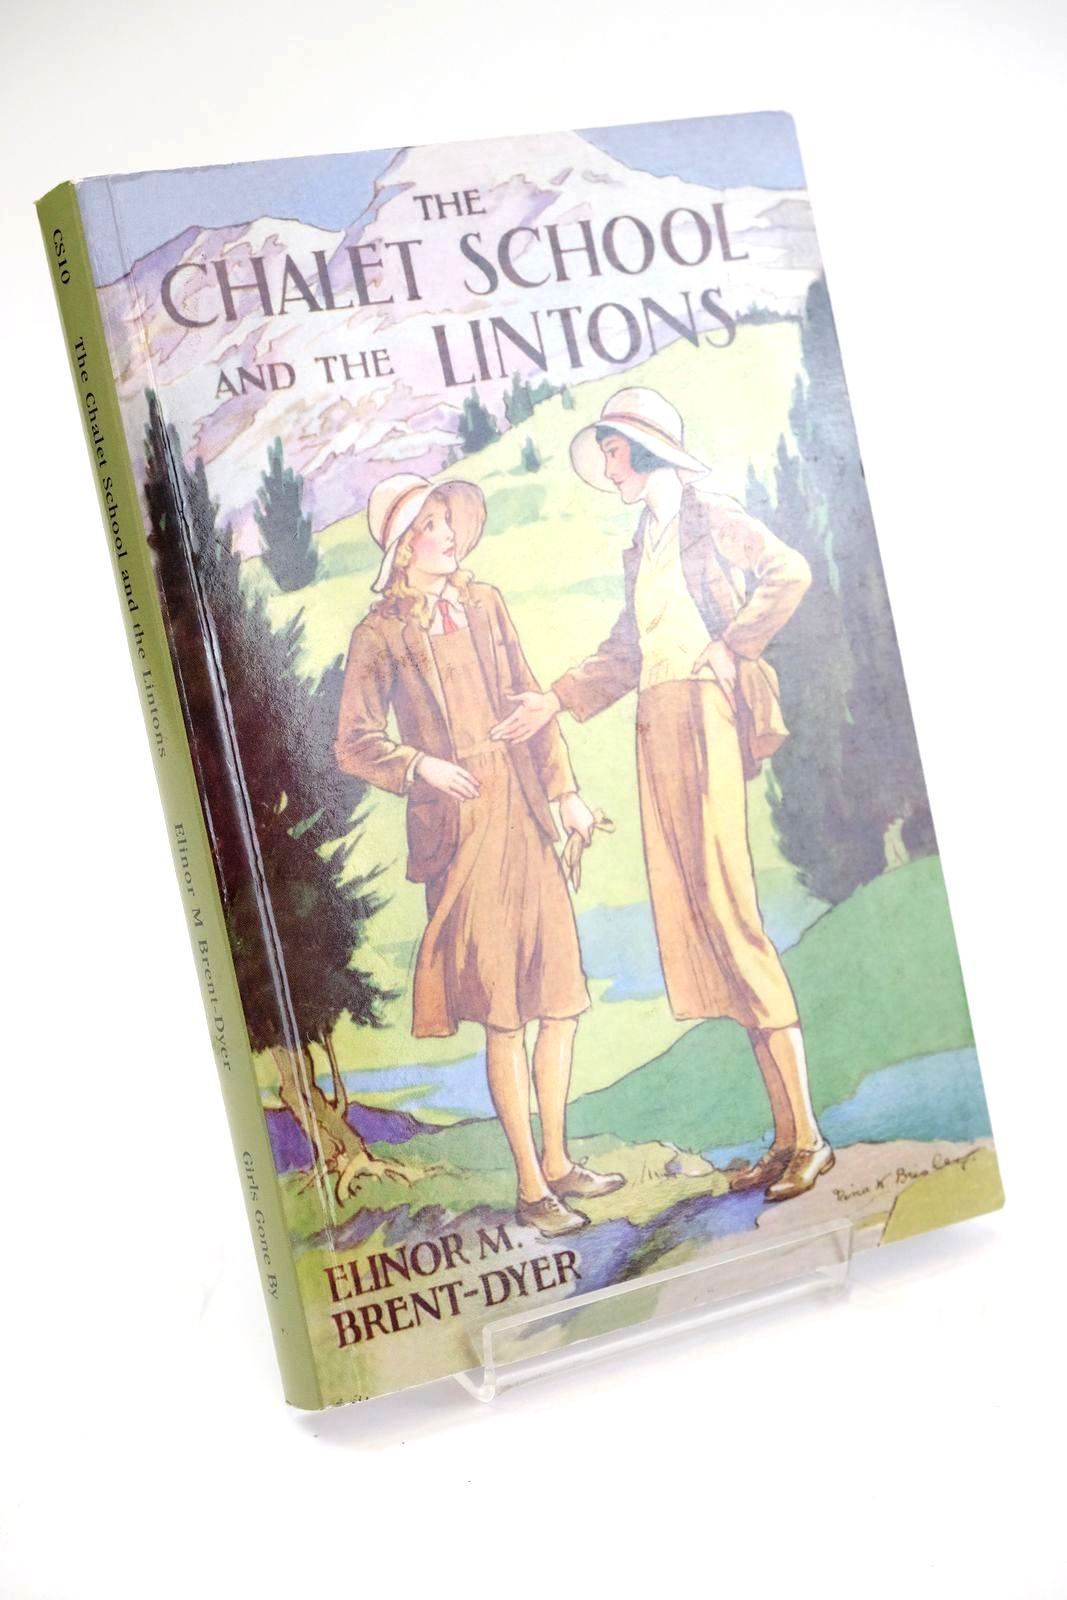 Photo of THE CHALET SCHOOL AND THE LINTONS written by Brent-Dyer, Elinor M. published by Girls Gone By (STOCK CODE: 1324806)  for sale by Stella & Rose's Books